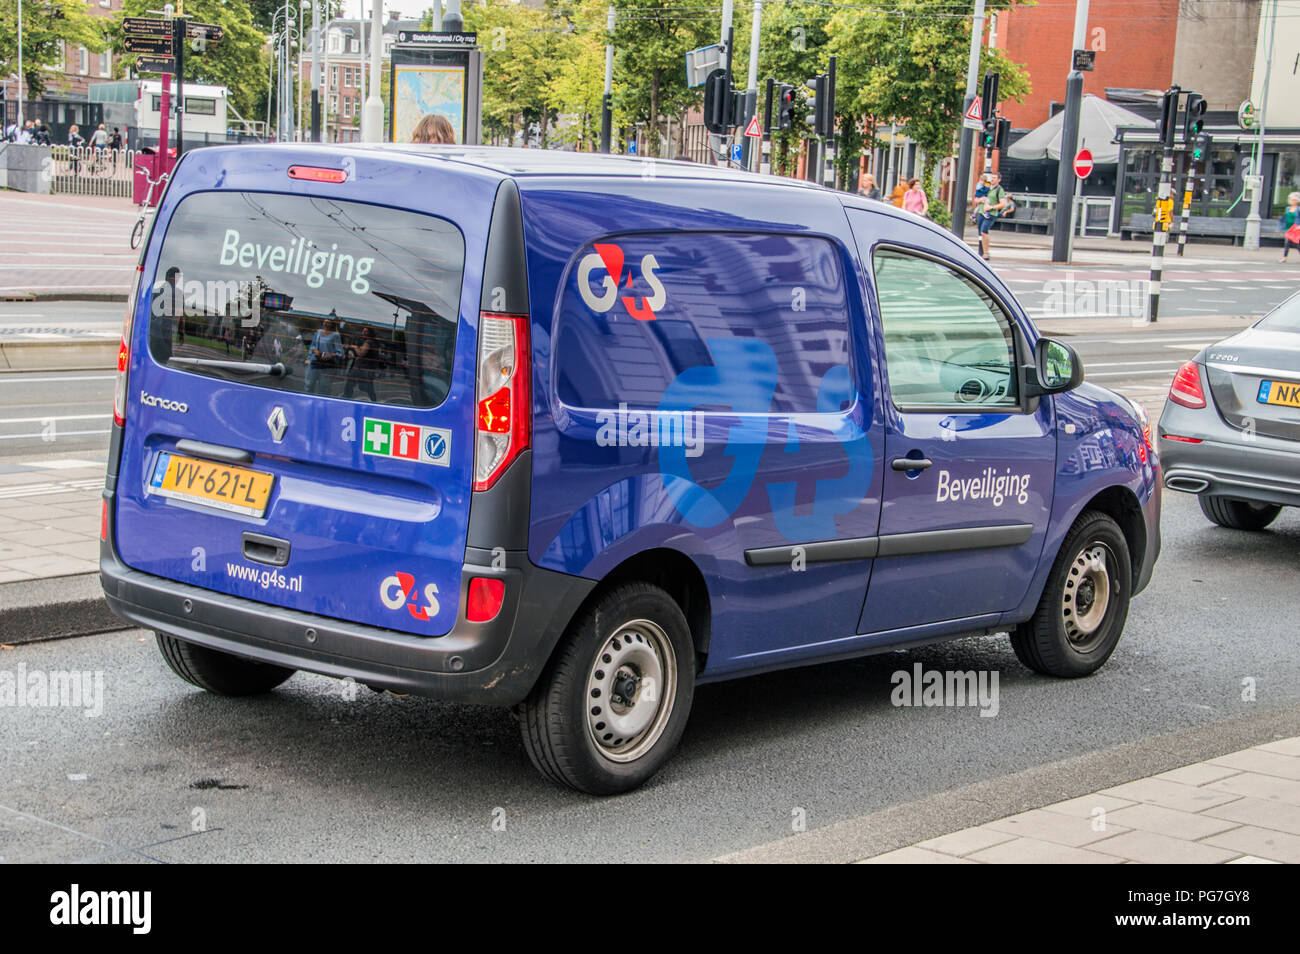 G4S Security Company Car At Amsterdam The Netherlands 2018 Stock Photo